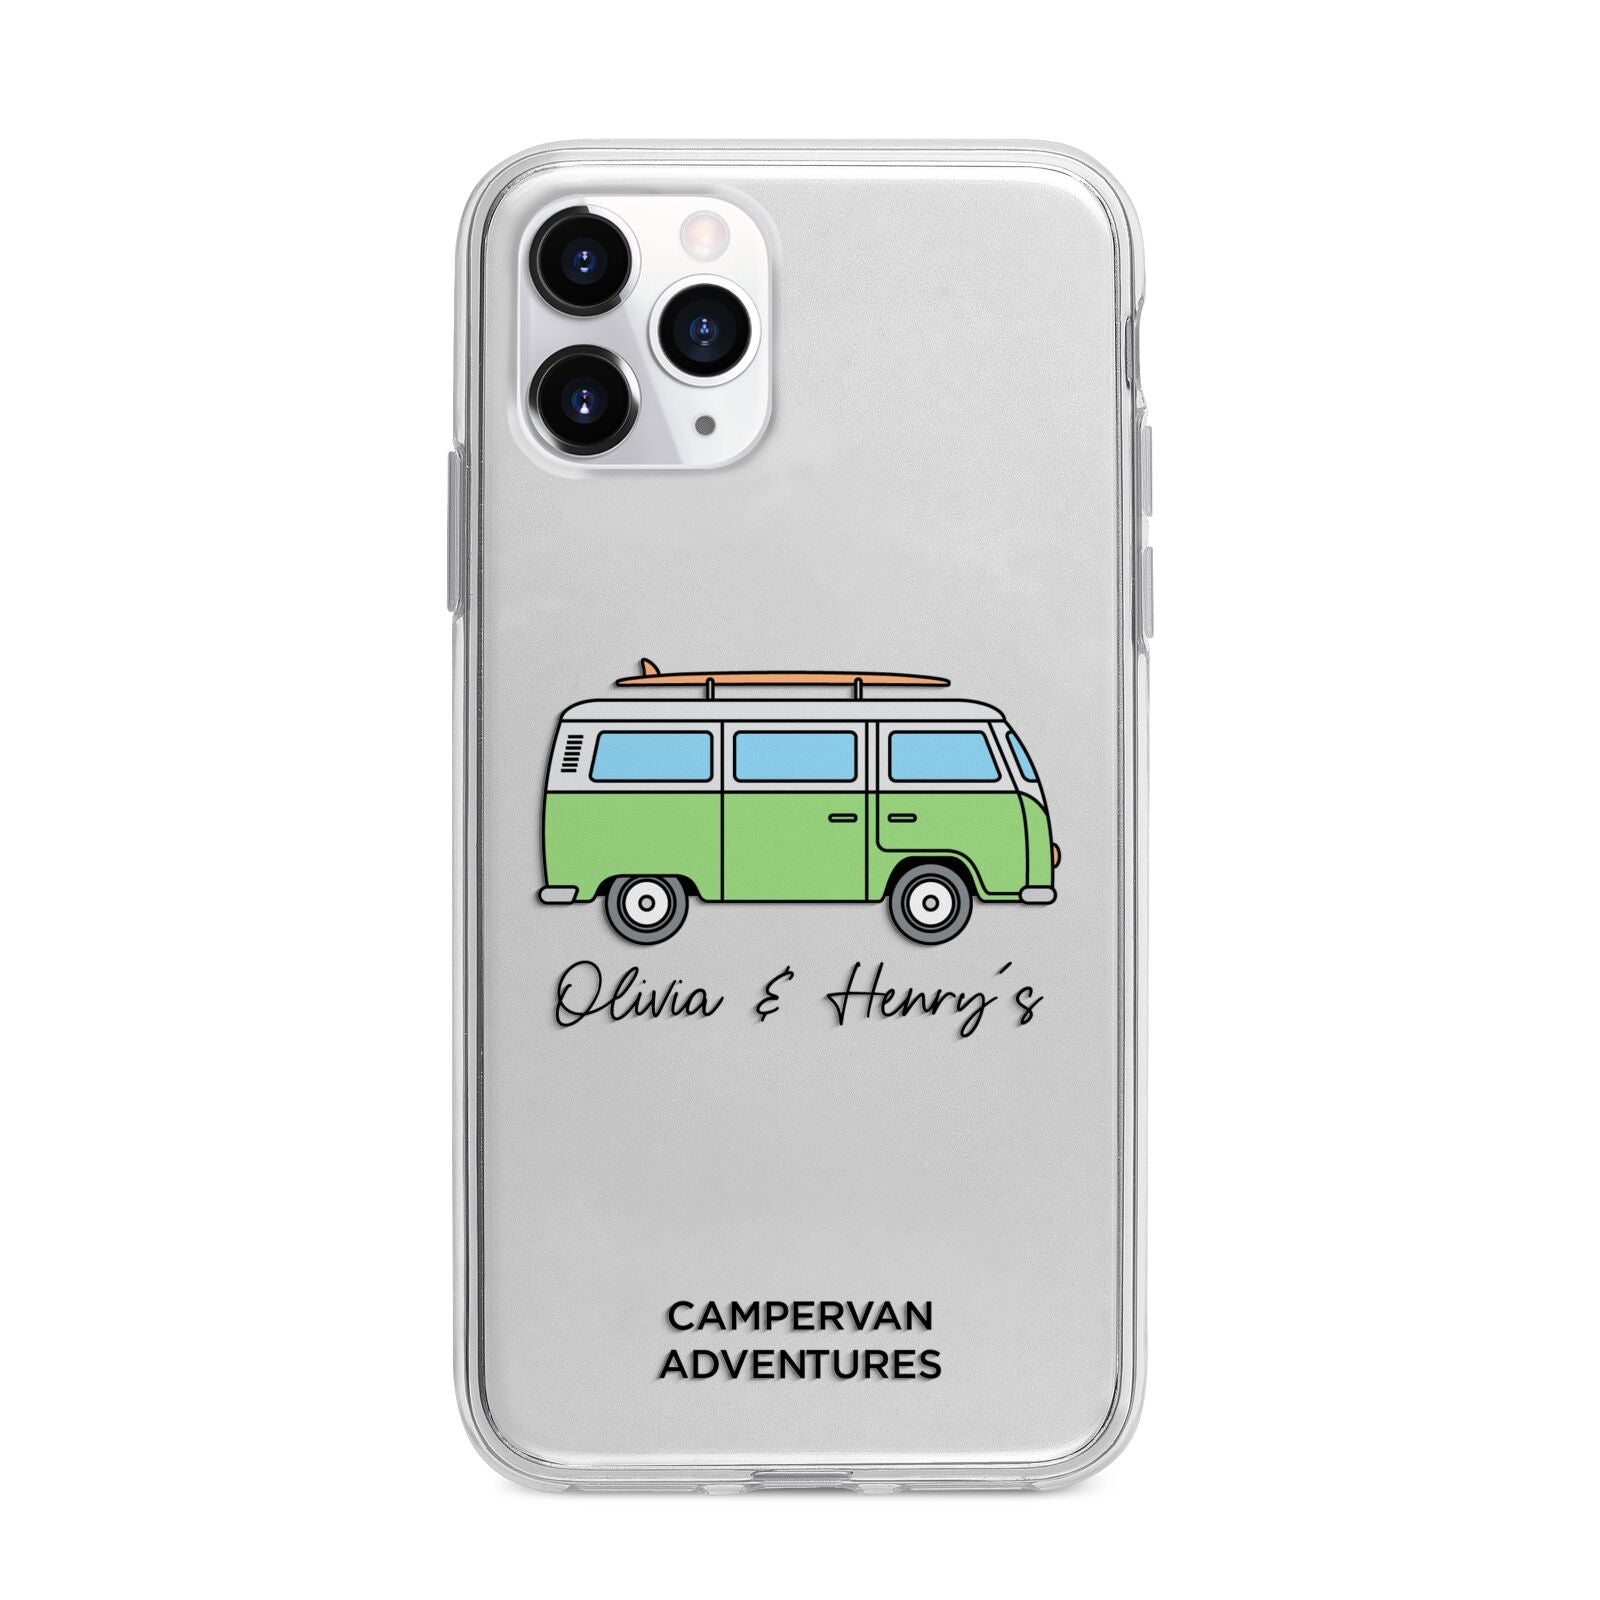 Green Bespoke Campervan Adventures Apple iPhone 11 Pro in Silver with Bumper Case